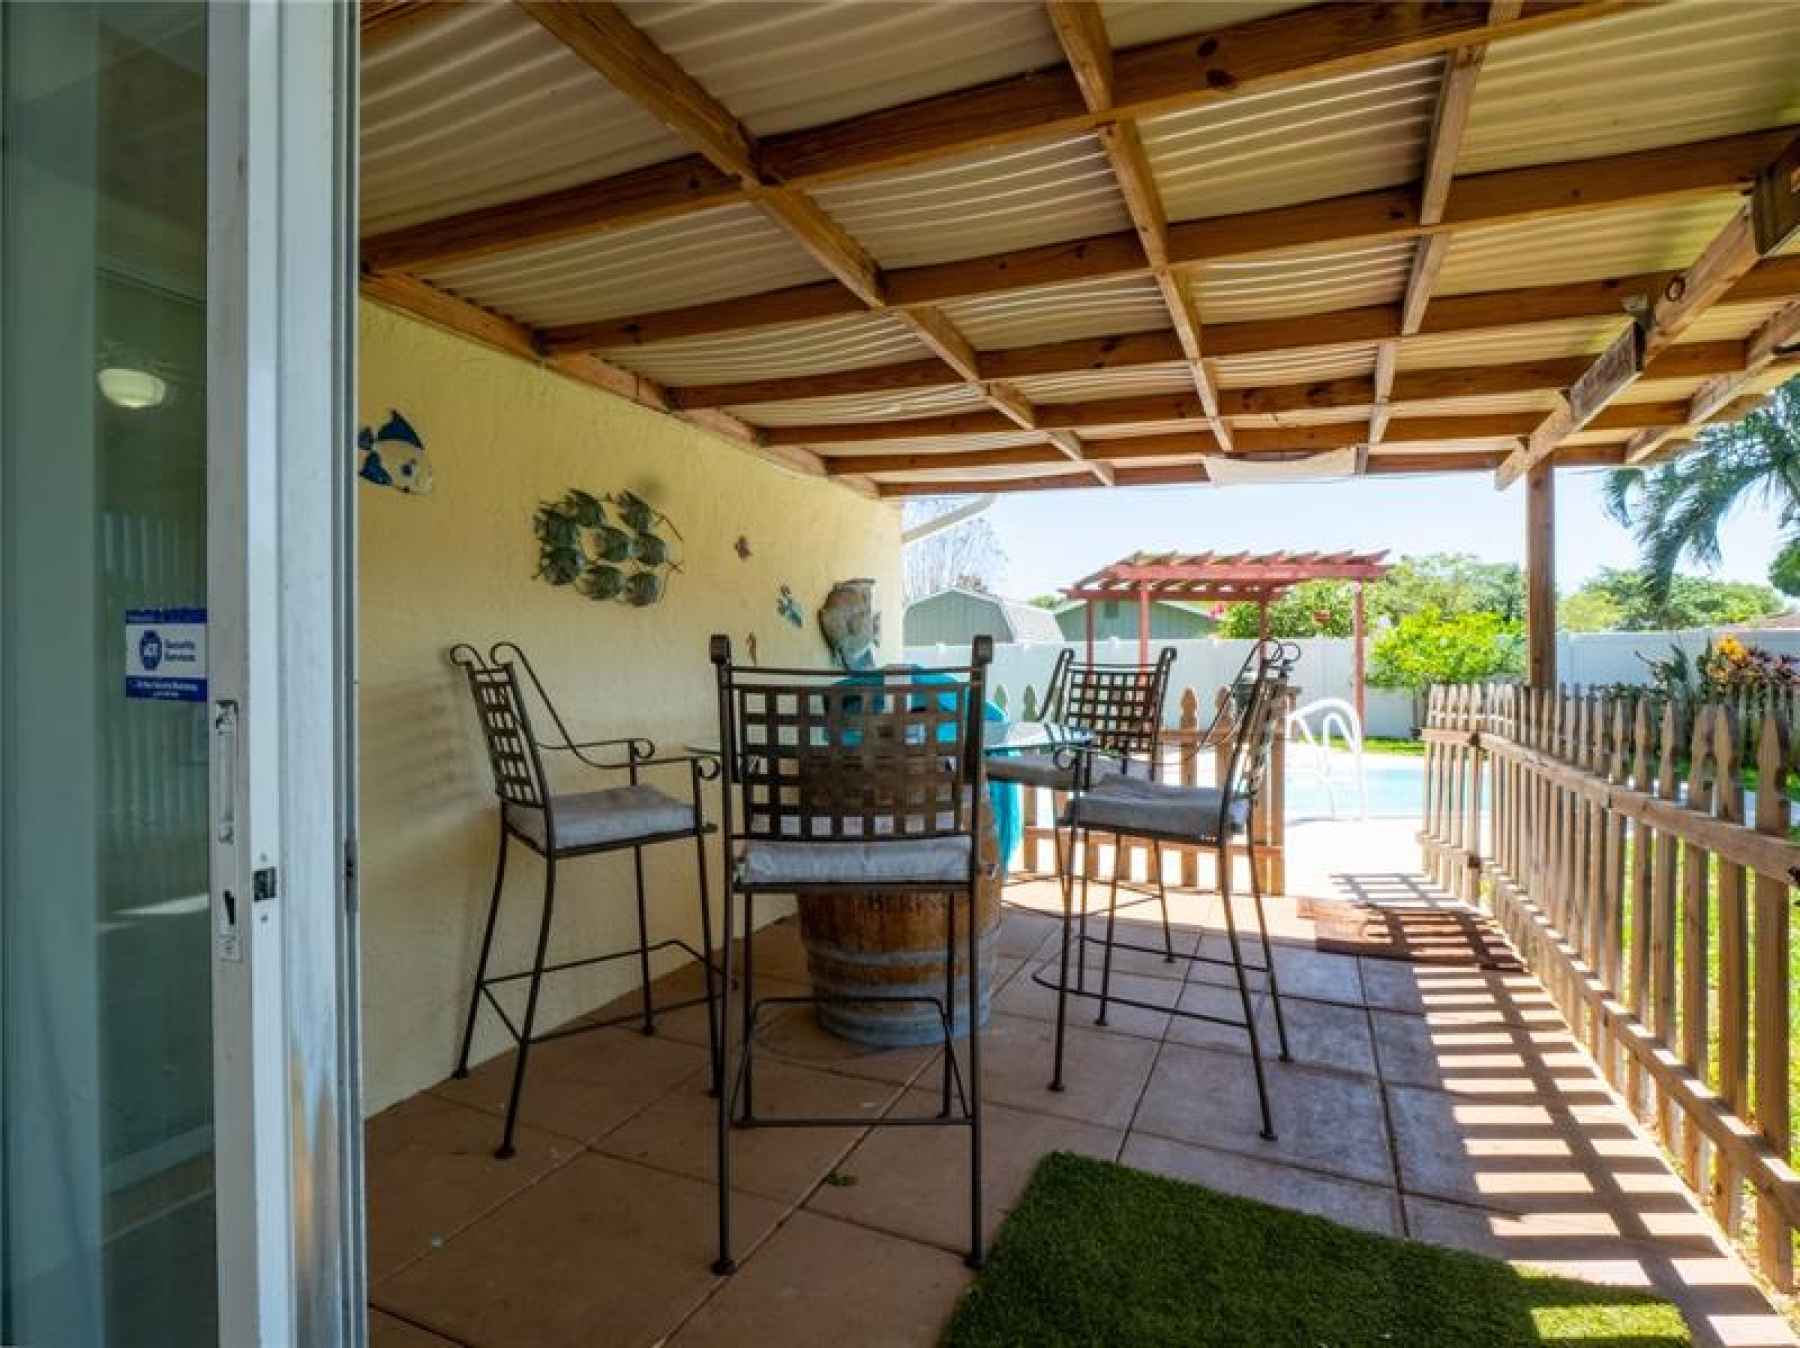 Covered patio off of porch